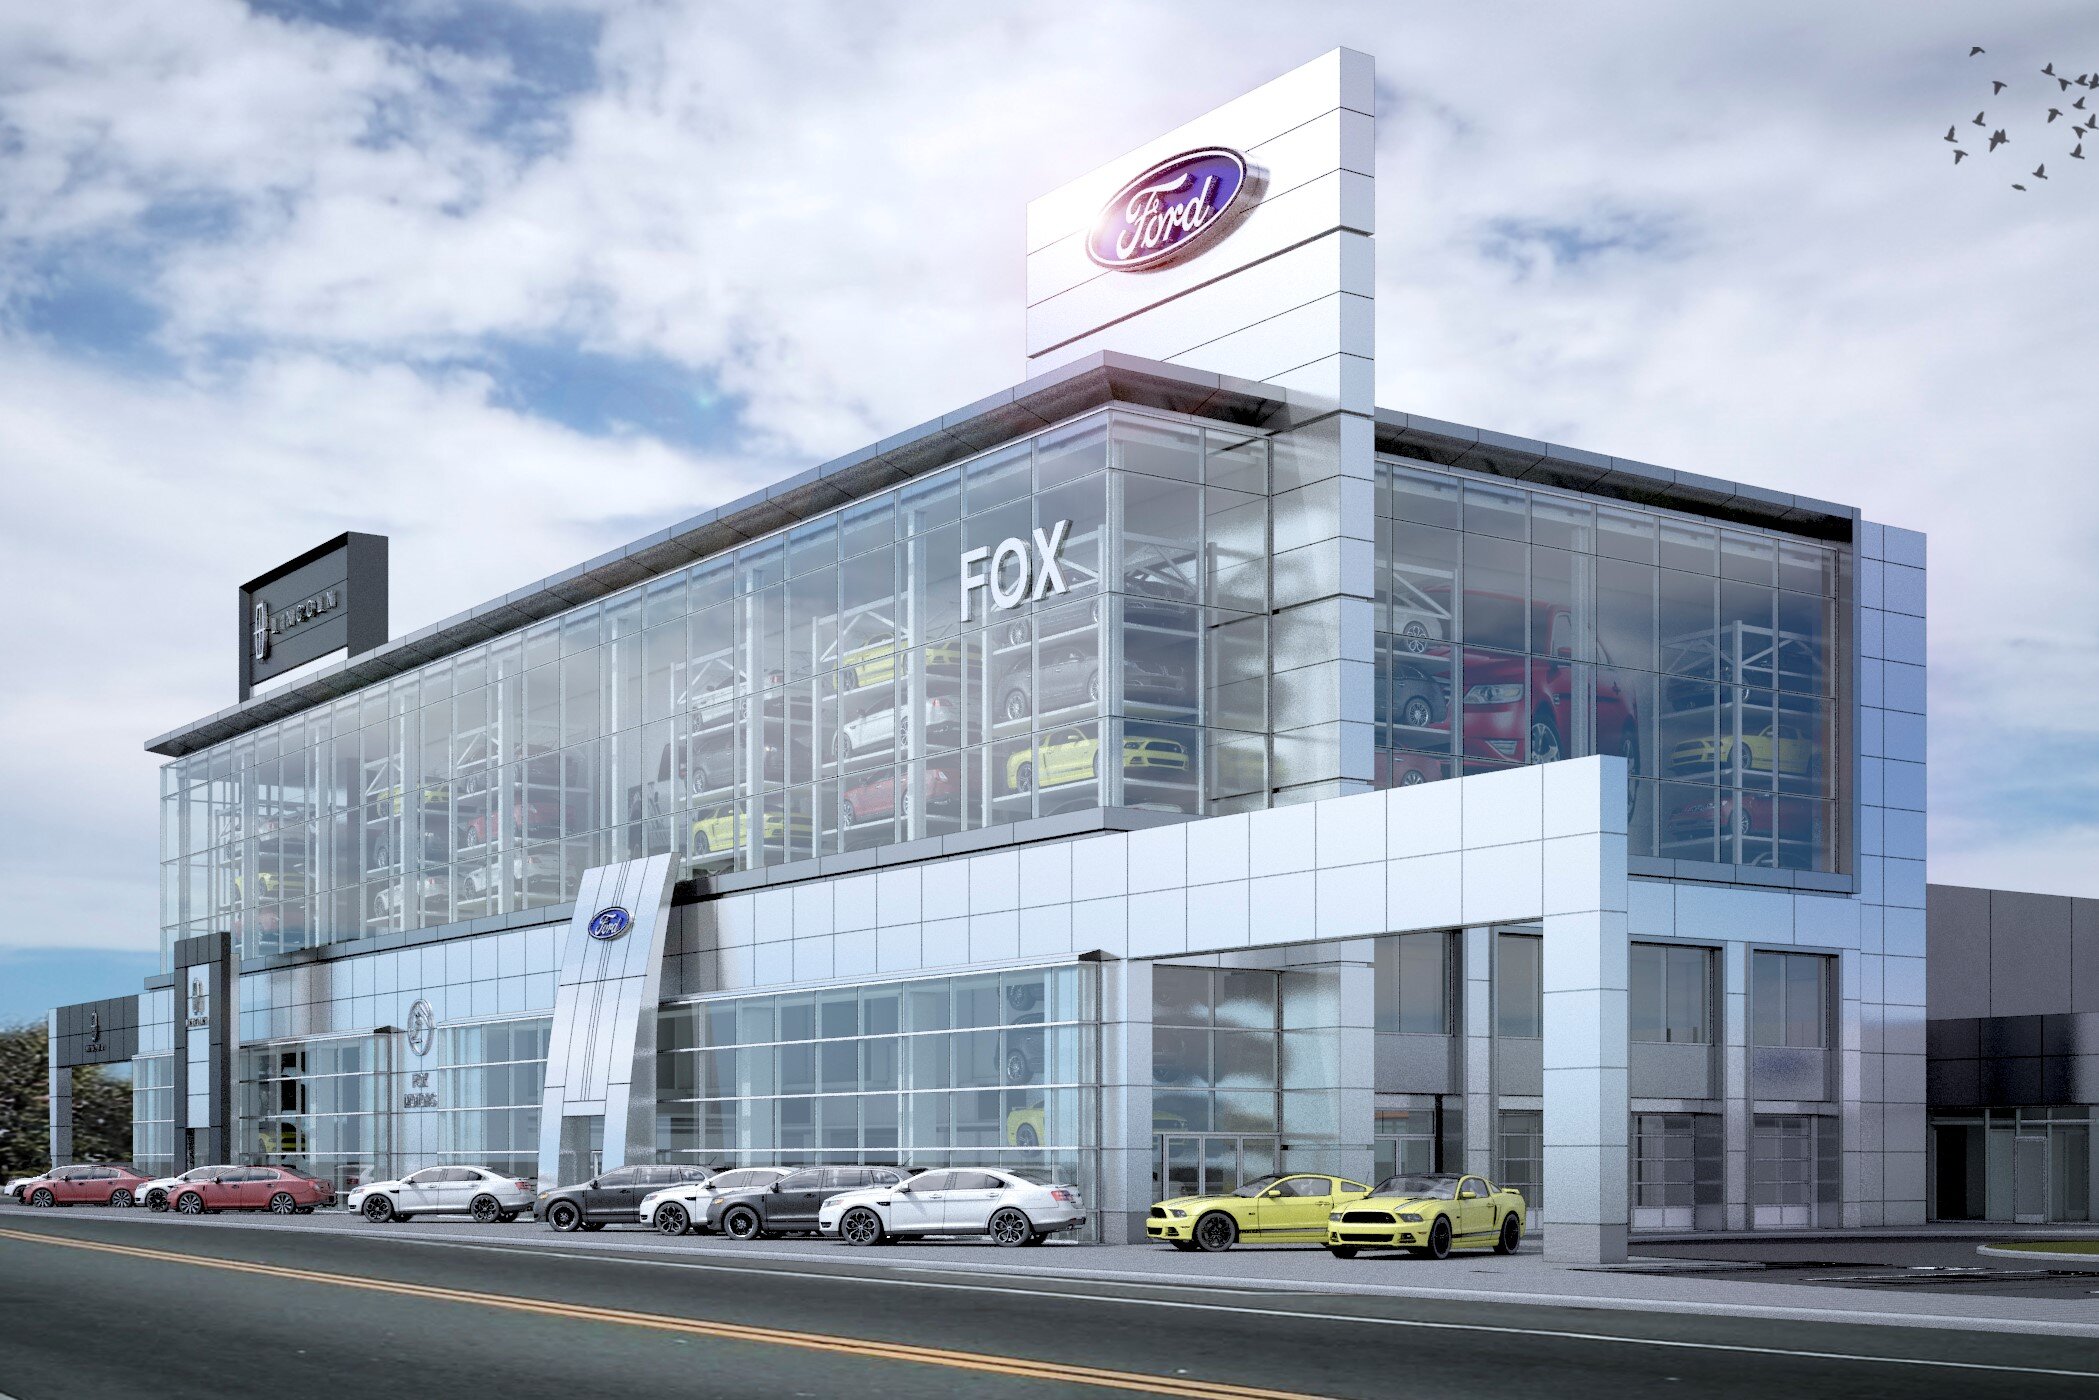 <span style="font-weight:bold"><p style="font-size:20px">Fox Ford</p></span>Chicago, Illinois